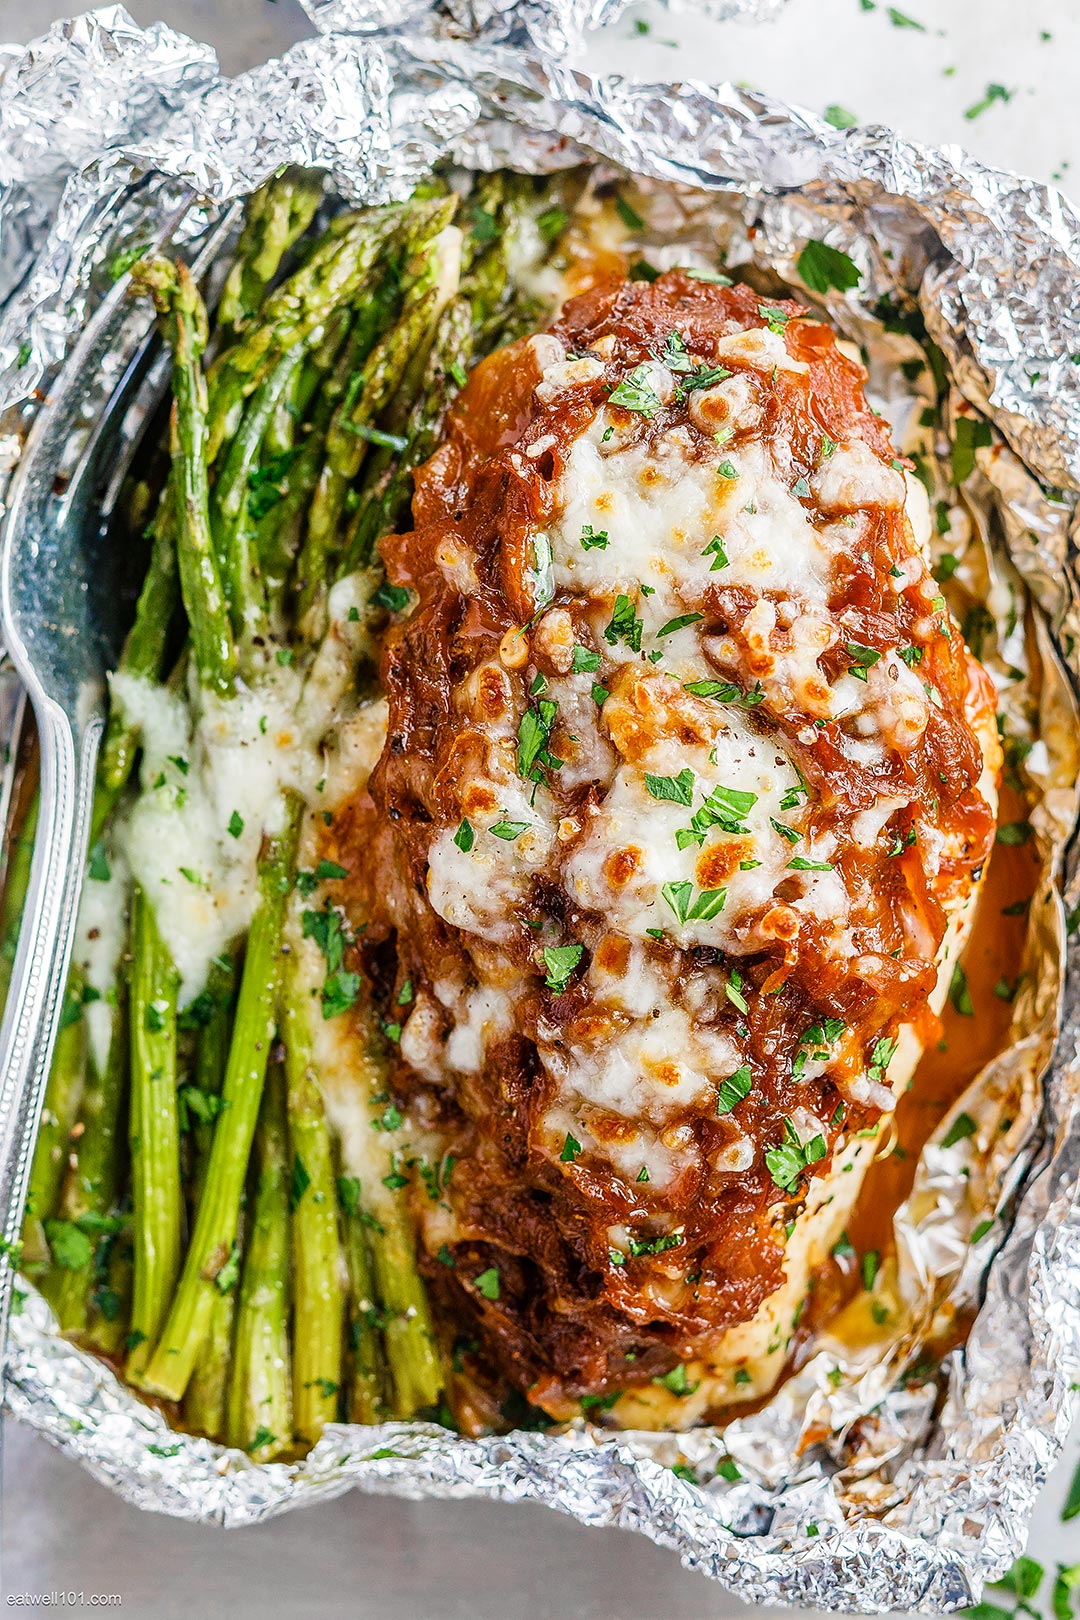 French Onion Chicken and Asparagus Foil Packets Recipe